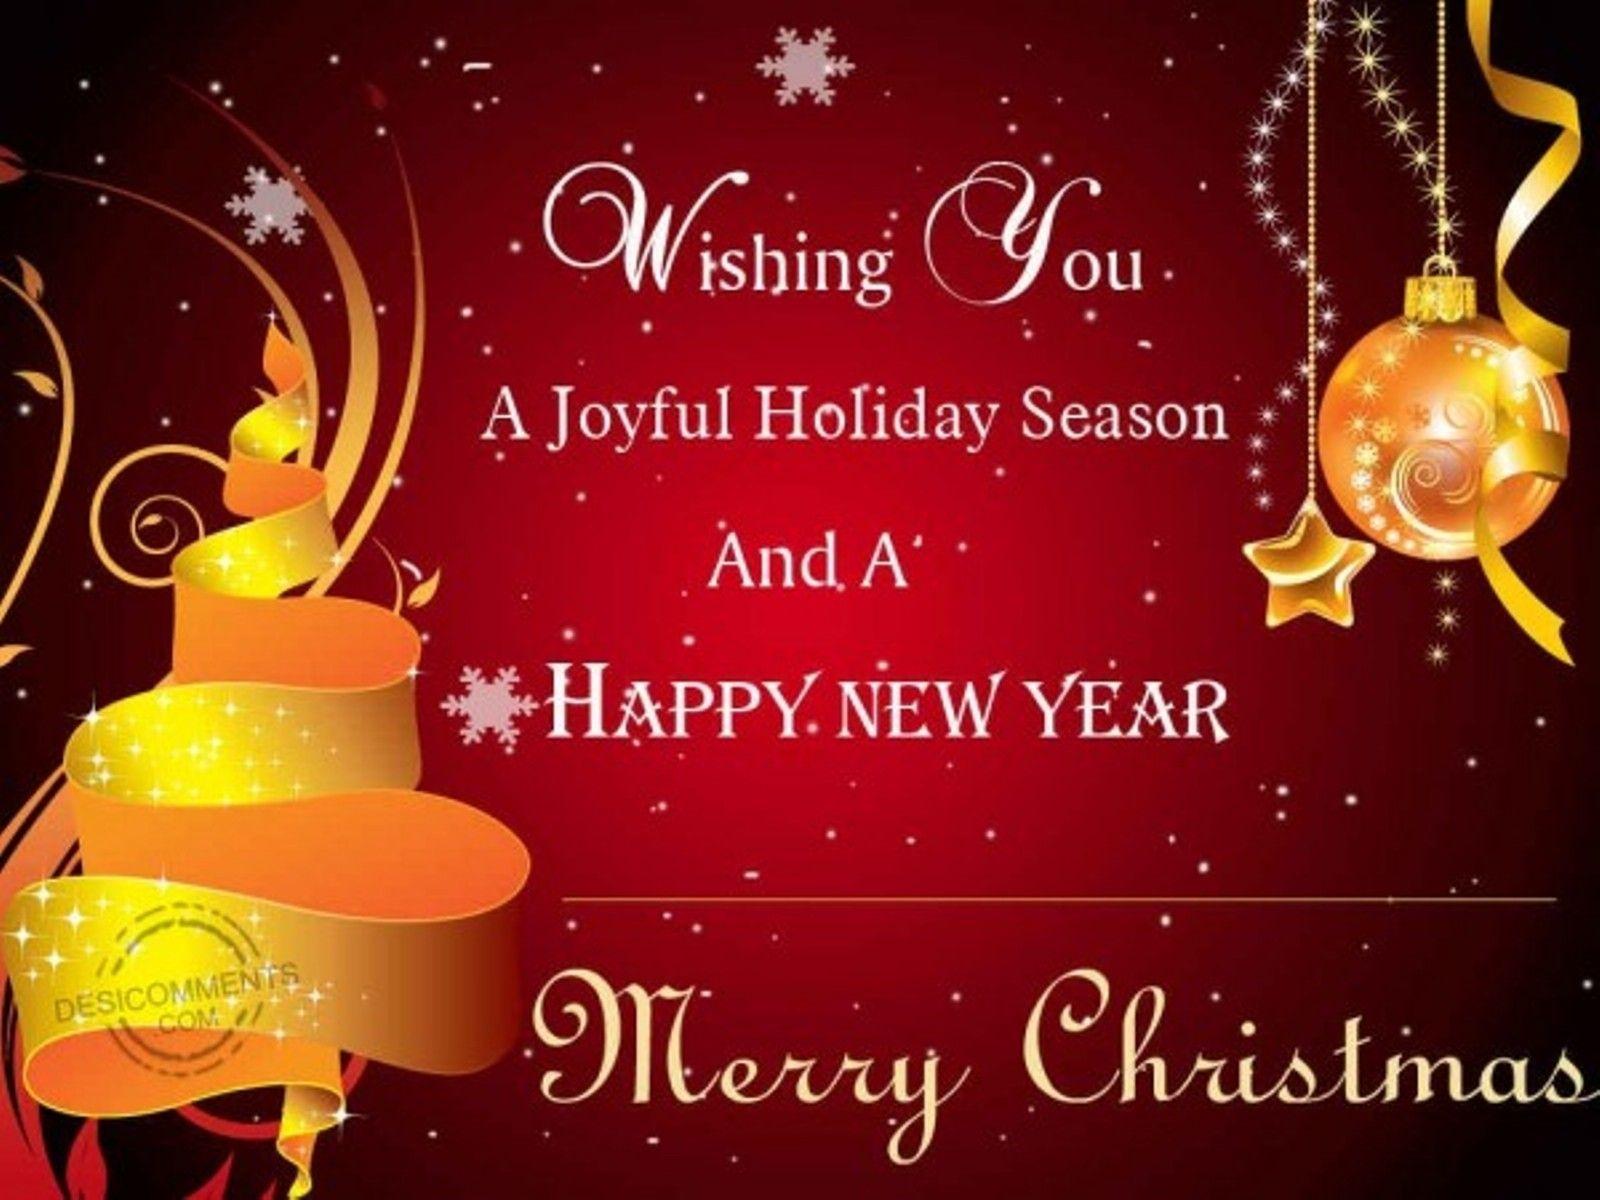 Merry Christmas Greeting Wishes on Holiday HD Photo. HD Famous